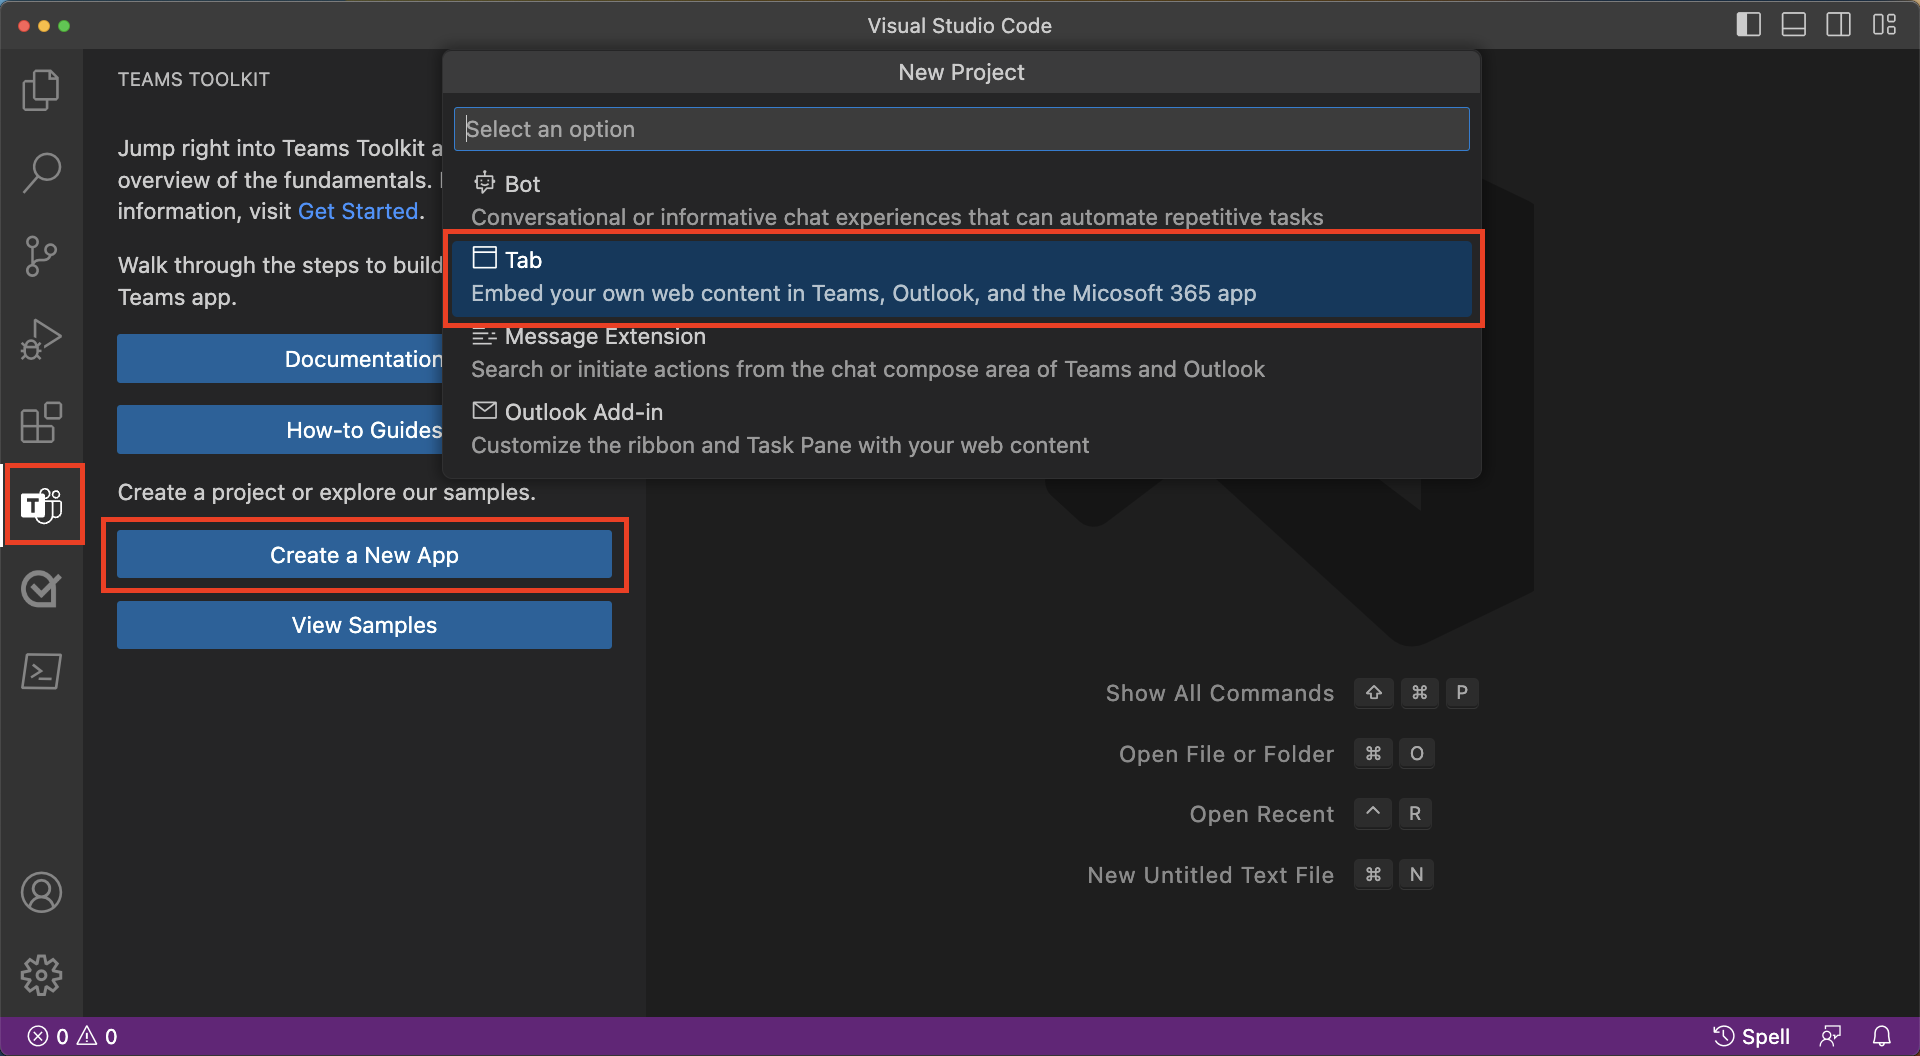 Screenshot that shows selections for creating a new Teams app in Visual Studio Code.